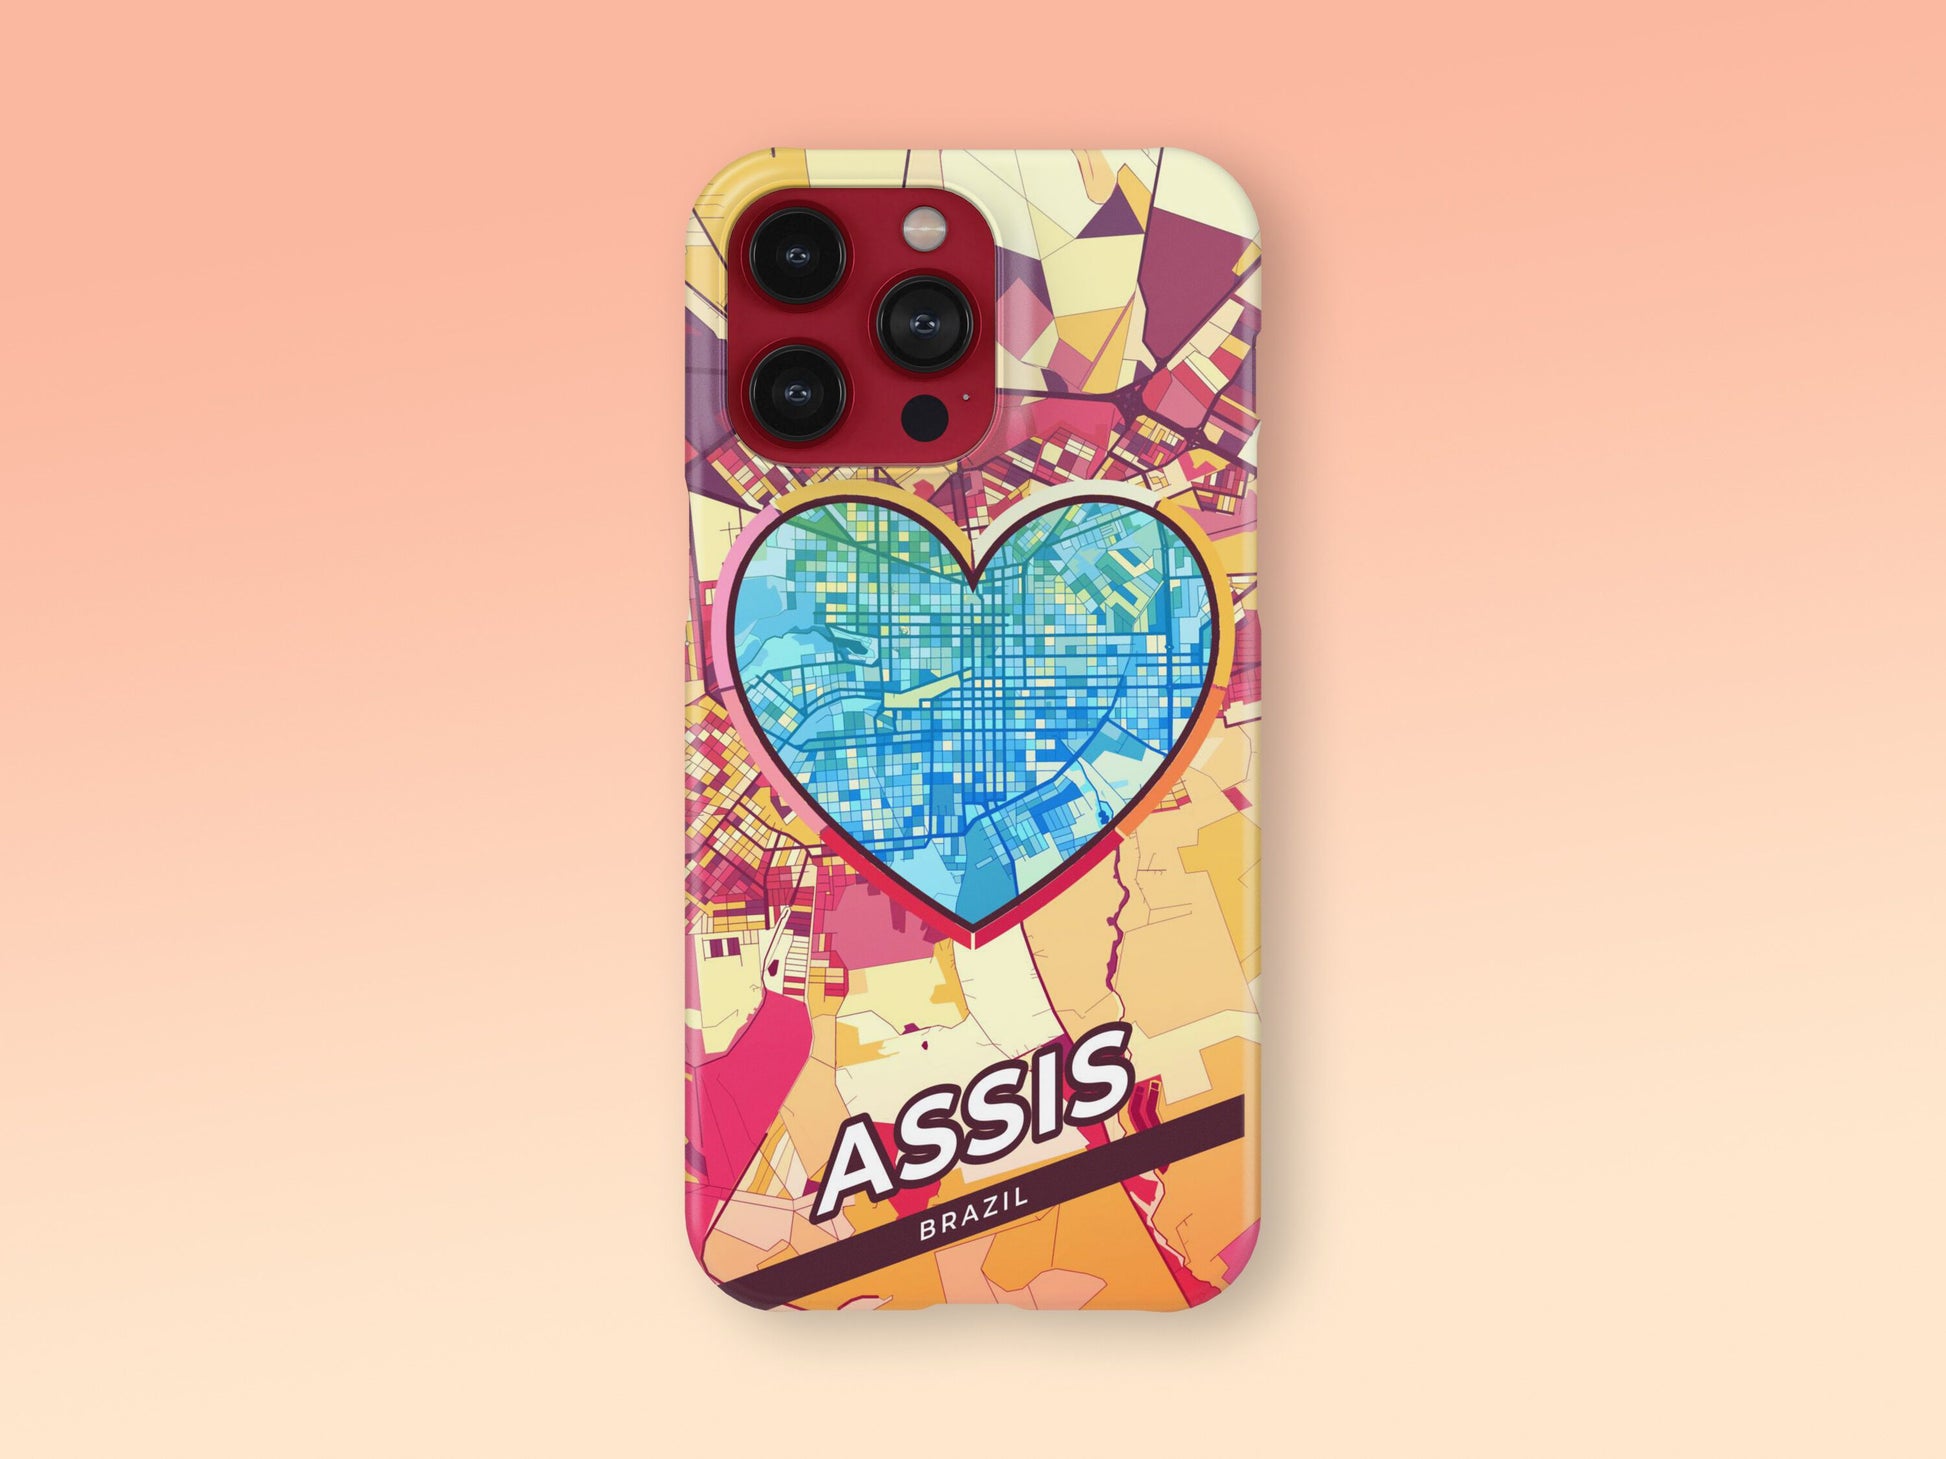 Assis Brazil slim phone case with colorful icon. Birthday, wedding or housewarming gift. Couple match cases. 2